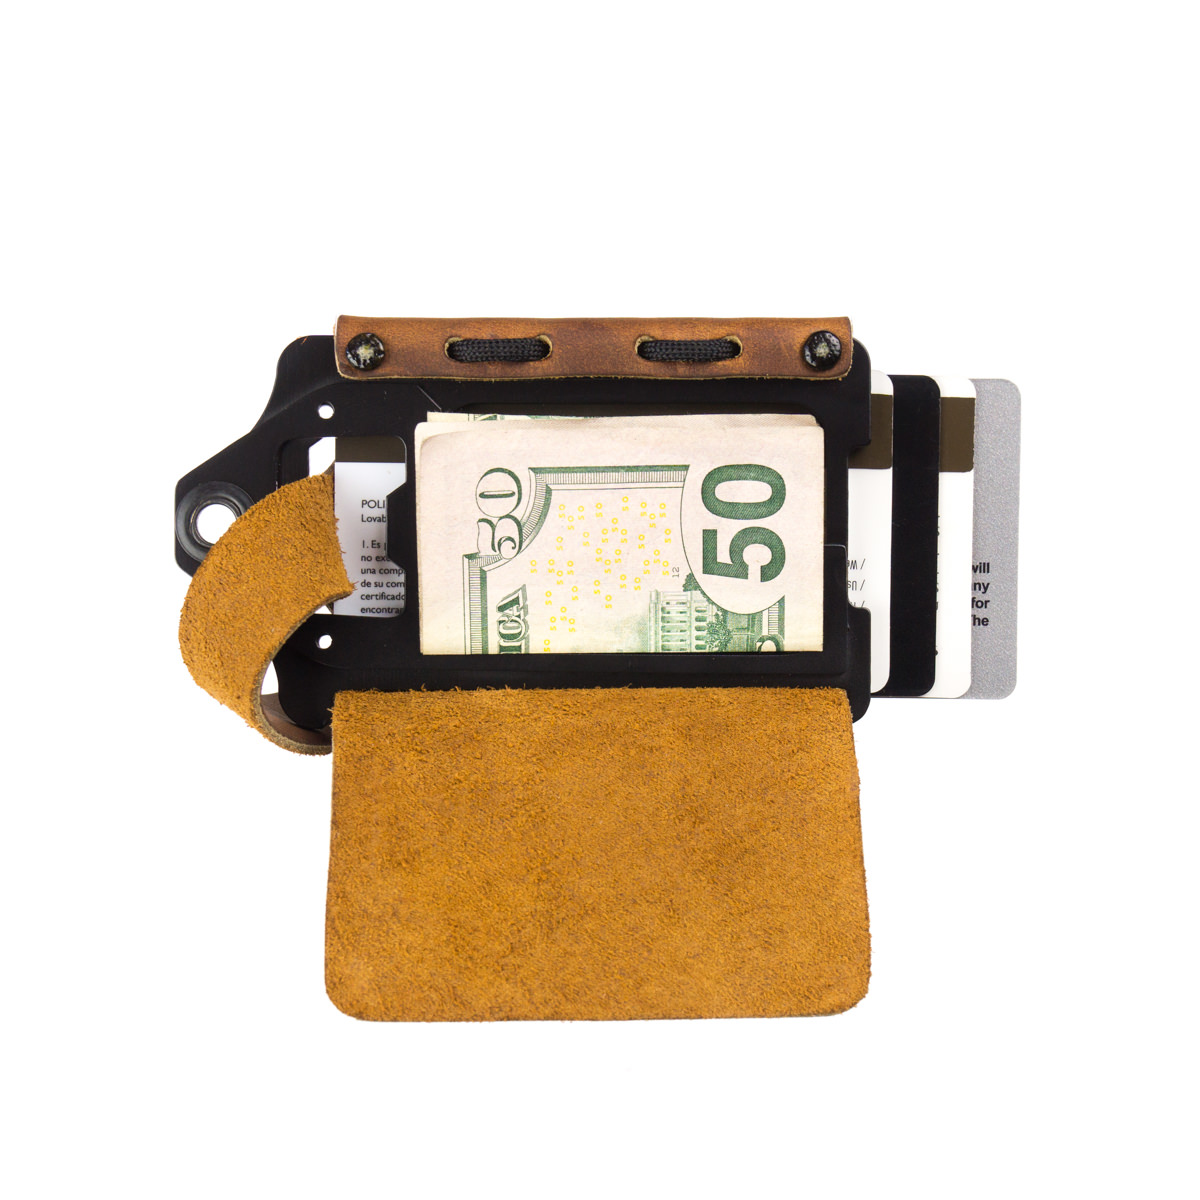 Trayvax Element Wallet - Tobacco Brown (Black Edition) | undefined